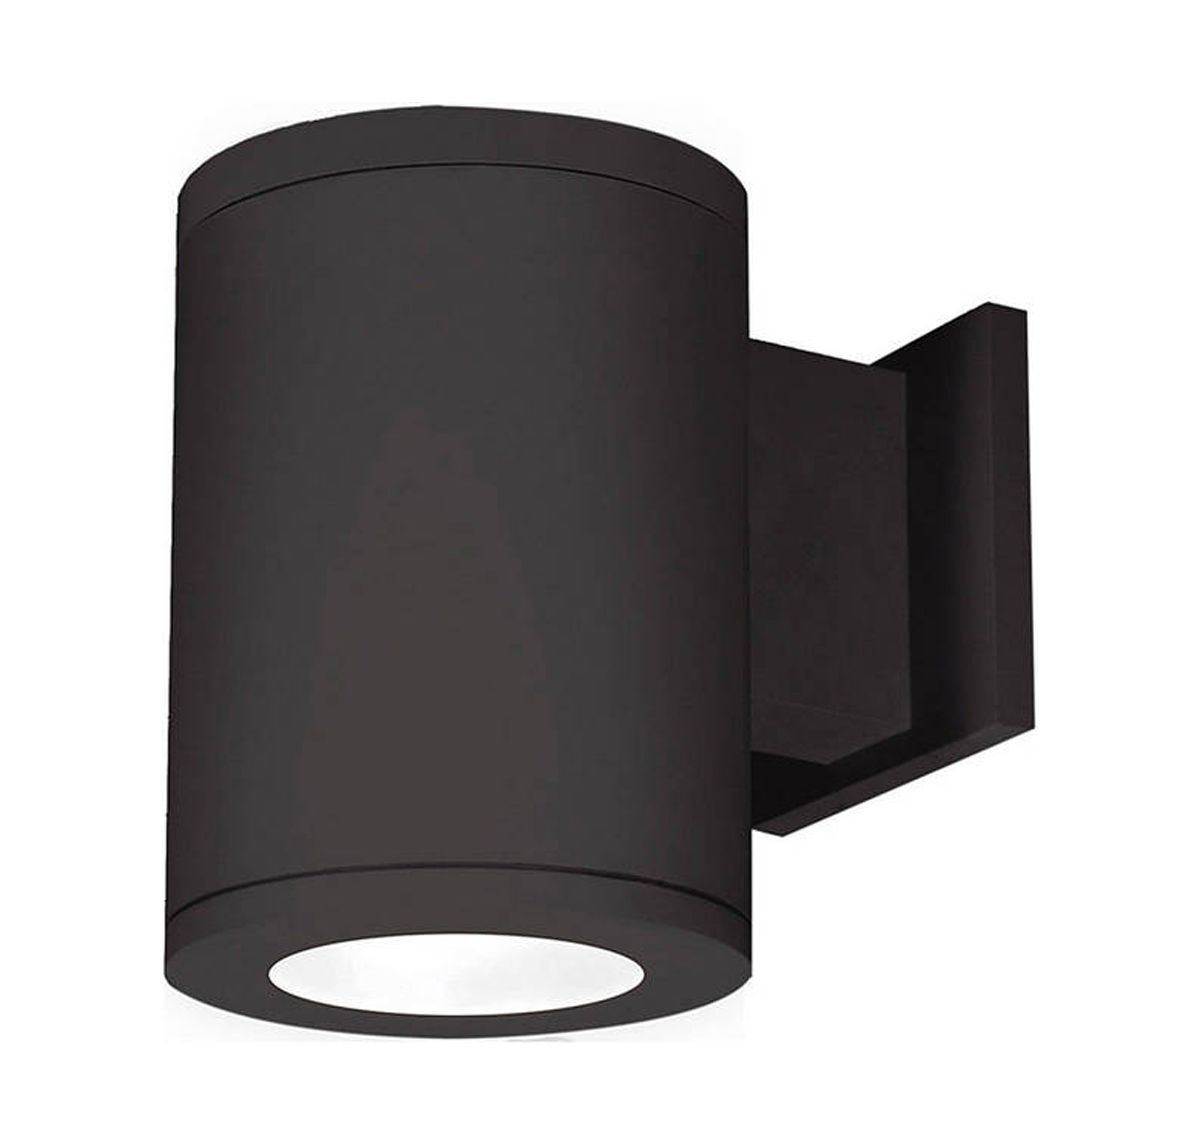 Wac Lighting Ds-Ws05-Fb Tube Architectural 1 Light 7" Tall Led Outdoor Wall Sconce - Black - image 1 of 5